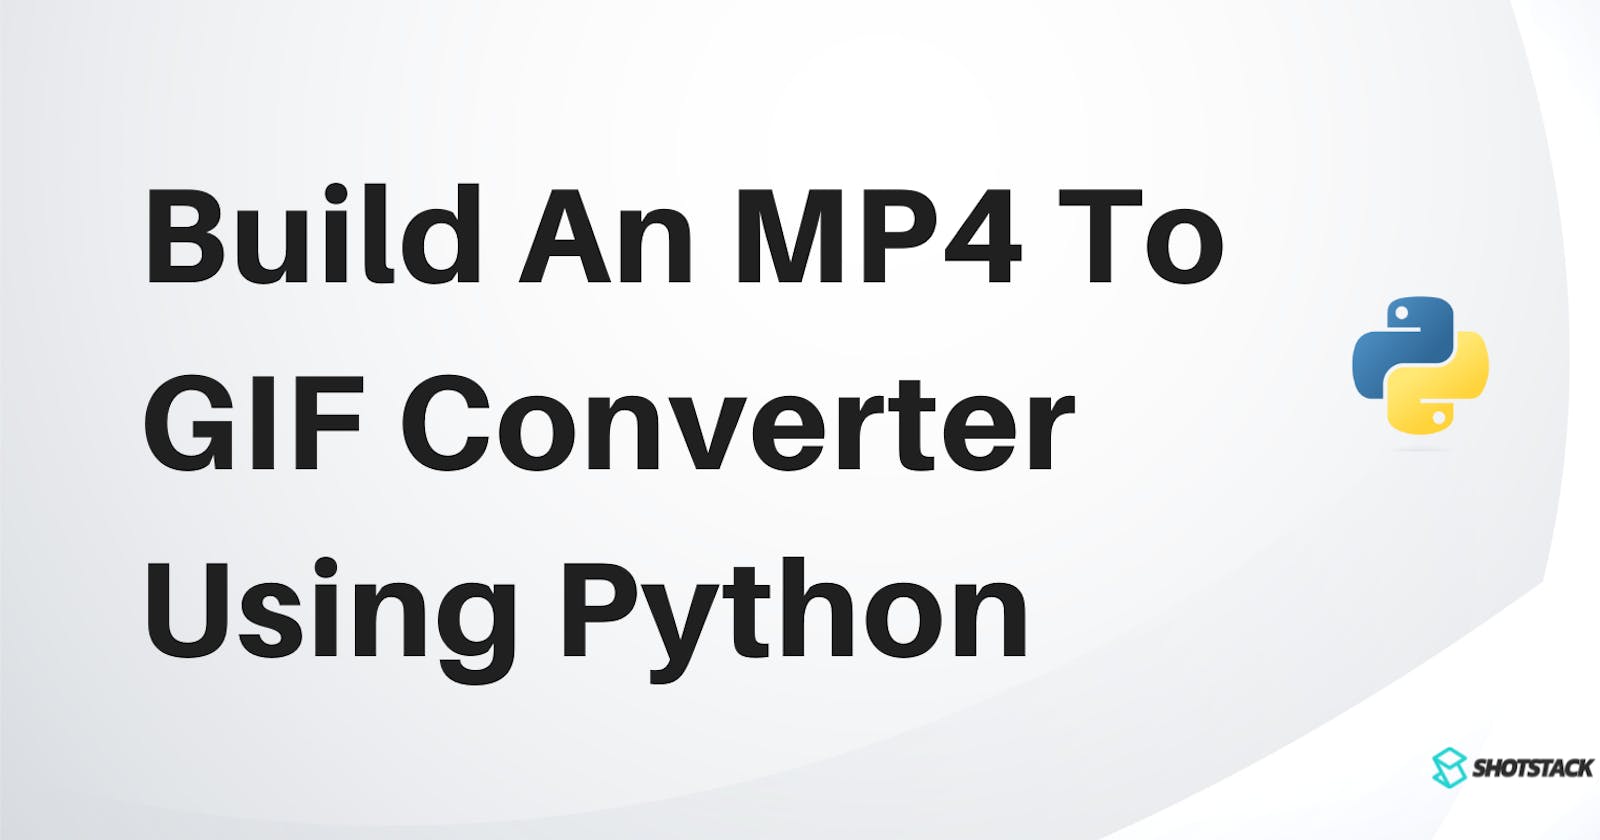 How to build an MP4 to GIF converter using Python